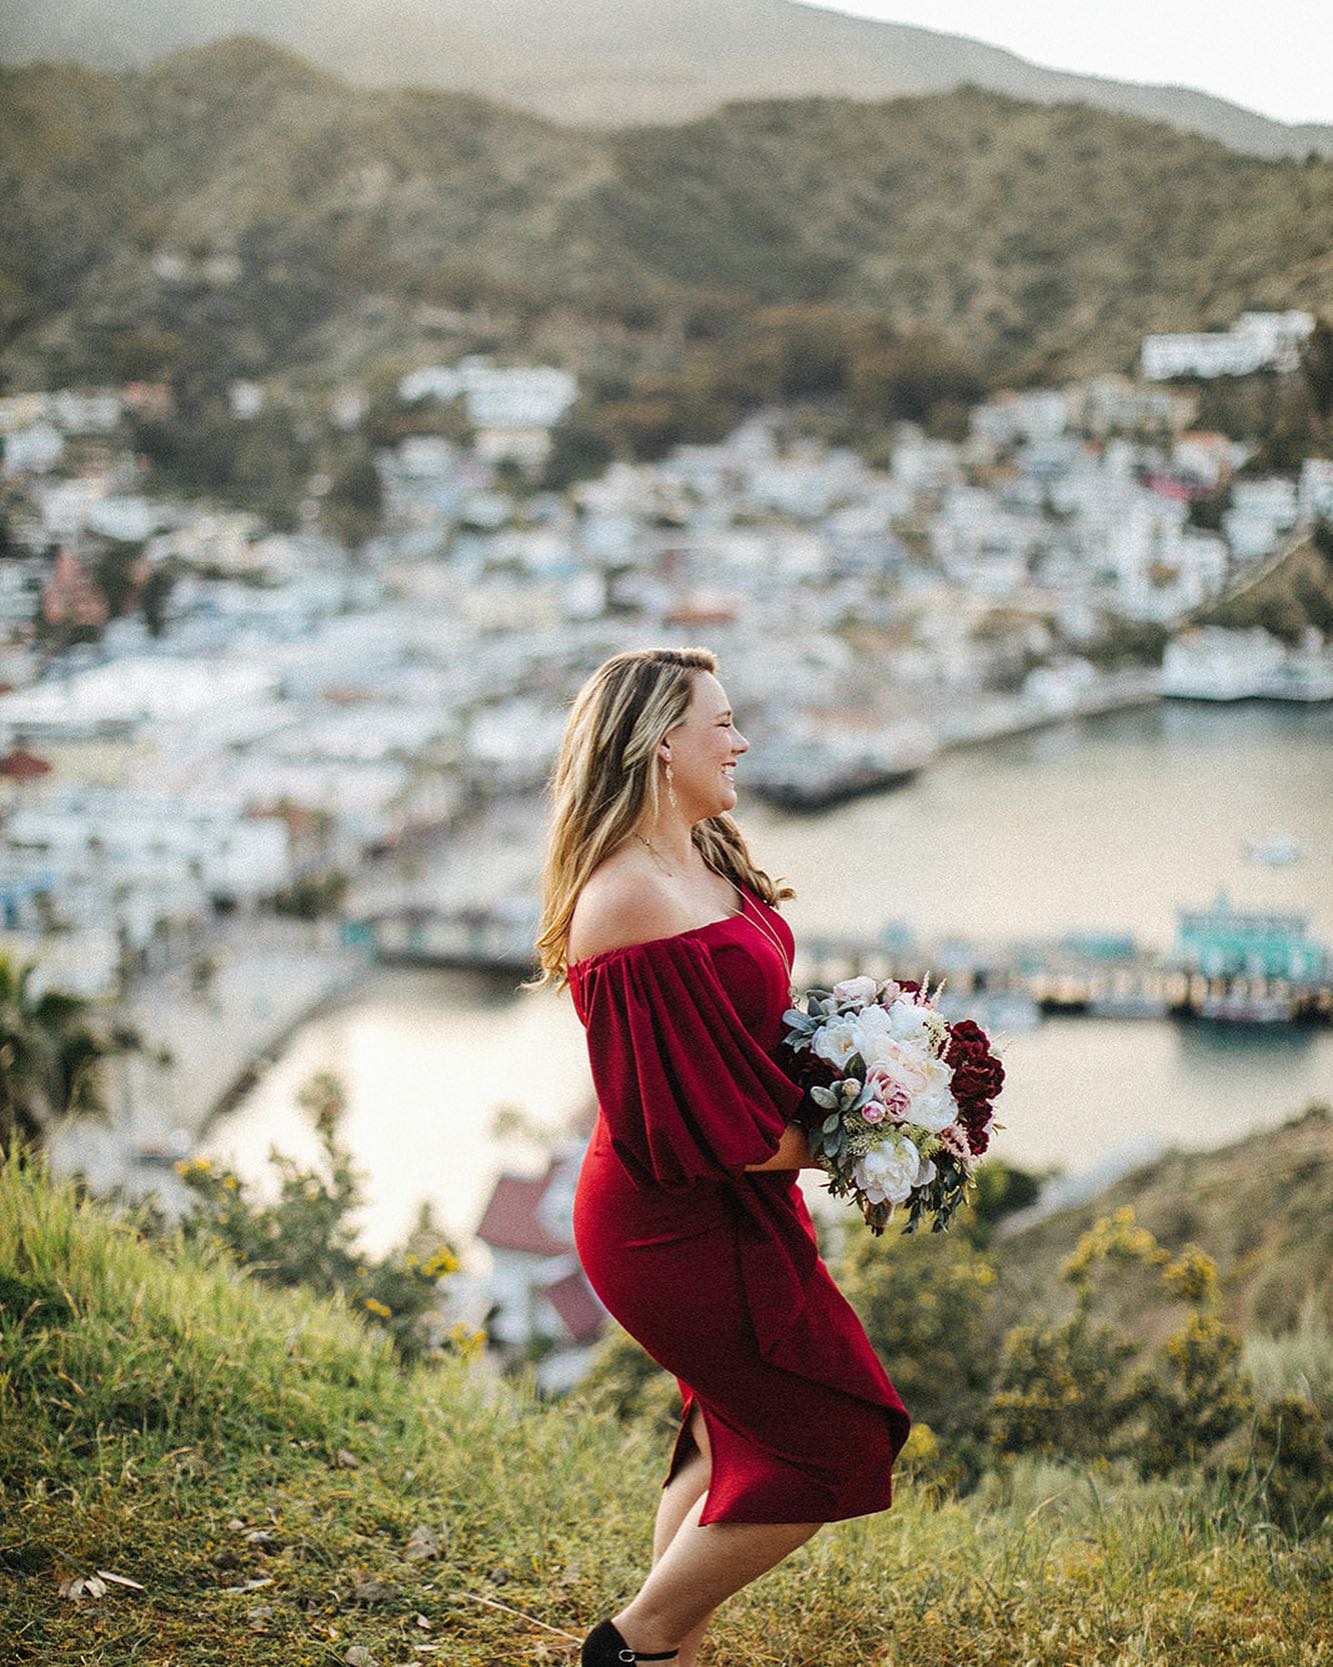 I was looking through photos of one of my favorite places; Catalina Island when I came across this one. I remember feeling a little burnt out and lost during that time of my life. But somehow I found a moment of laughter which brought on the feeling of gratitude. 

When you harness hope you allow for healing.

📷 @samanthamariephotographie